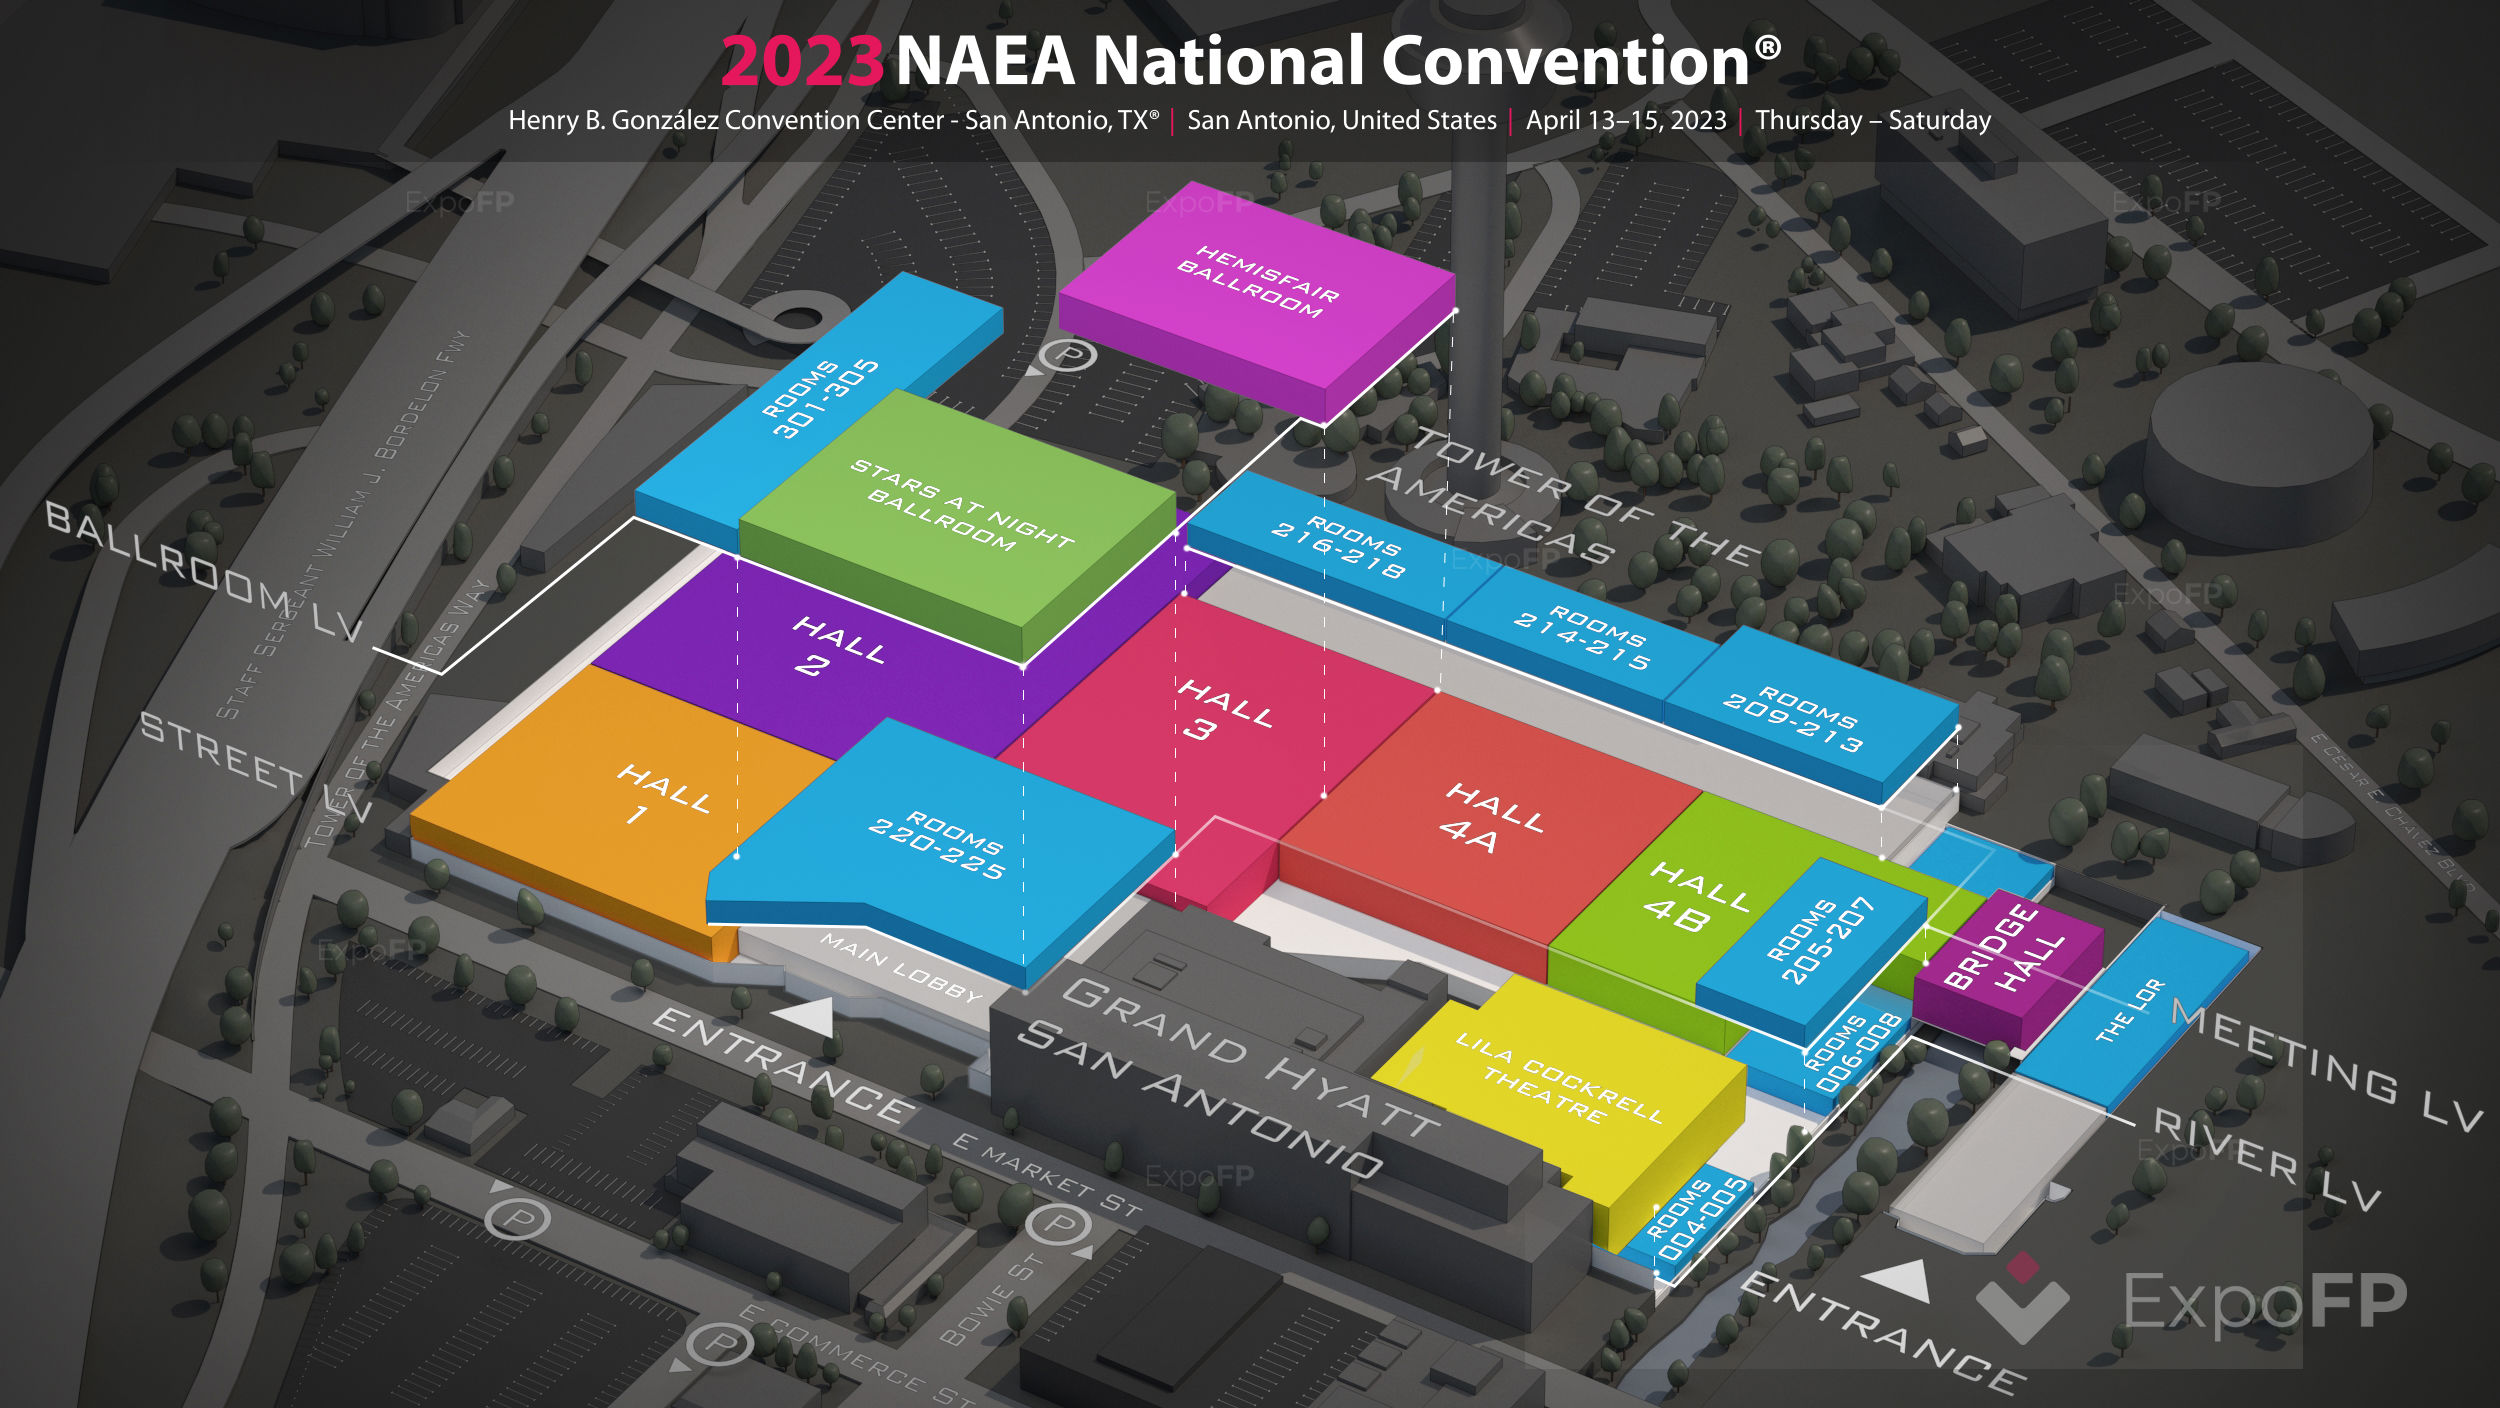 NAEA National Convention 2023 in Henry B. González Convention Center